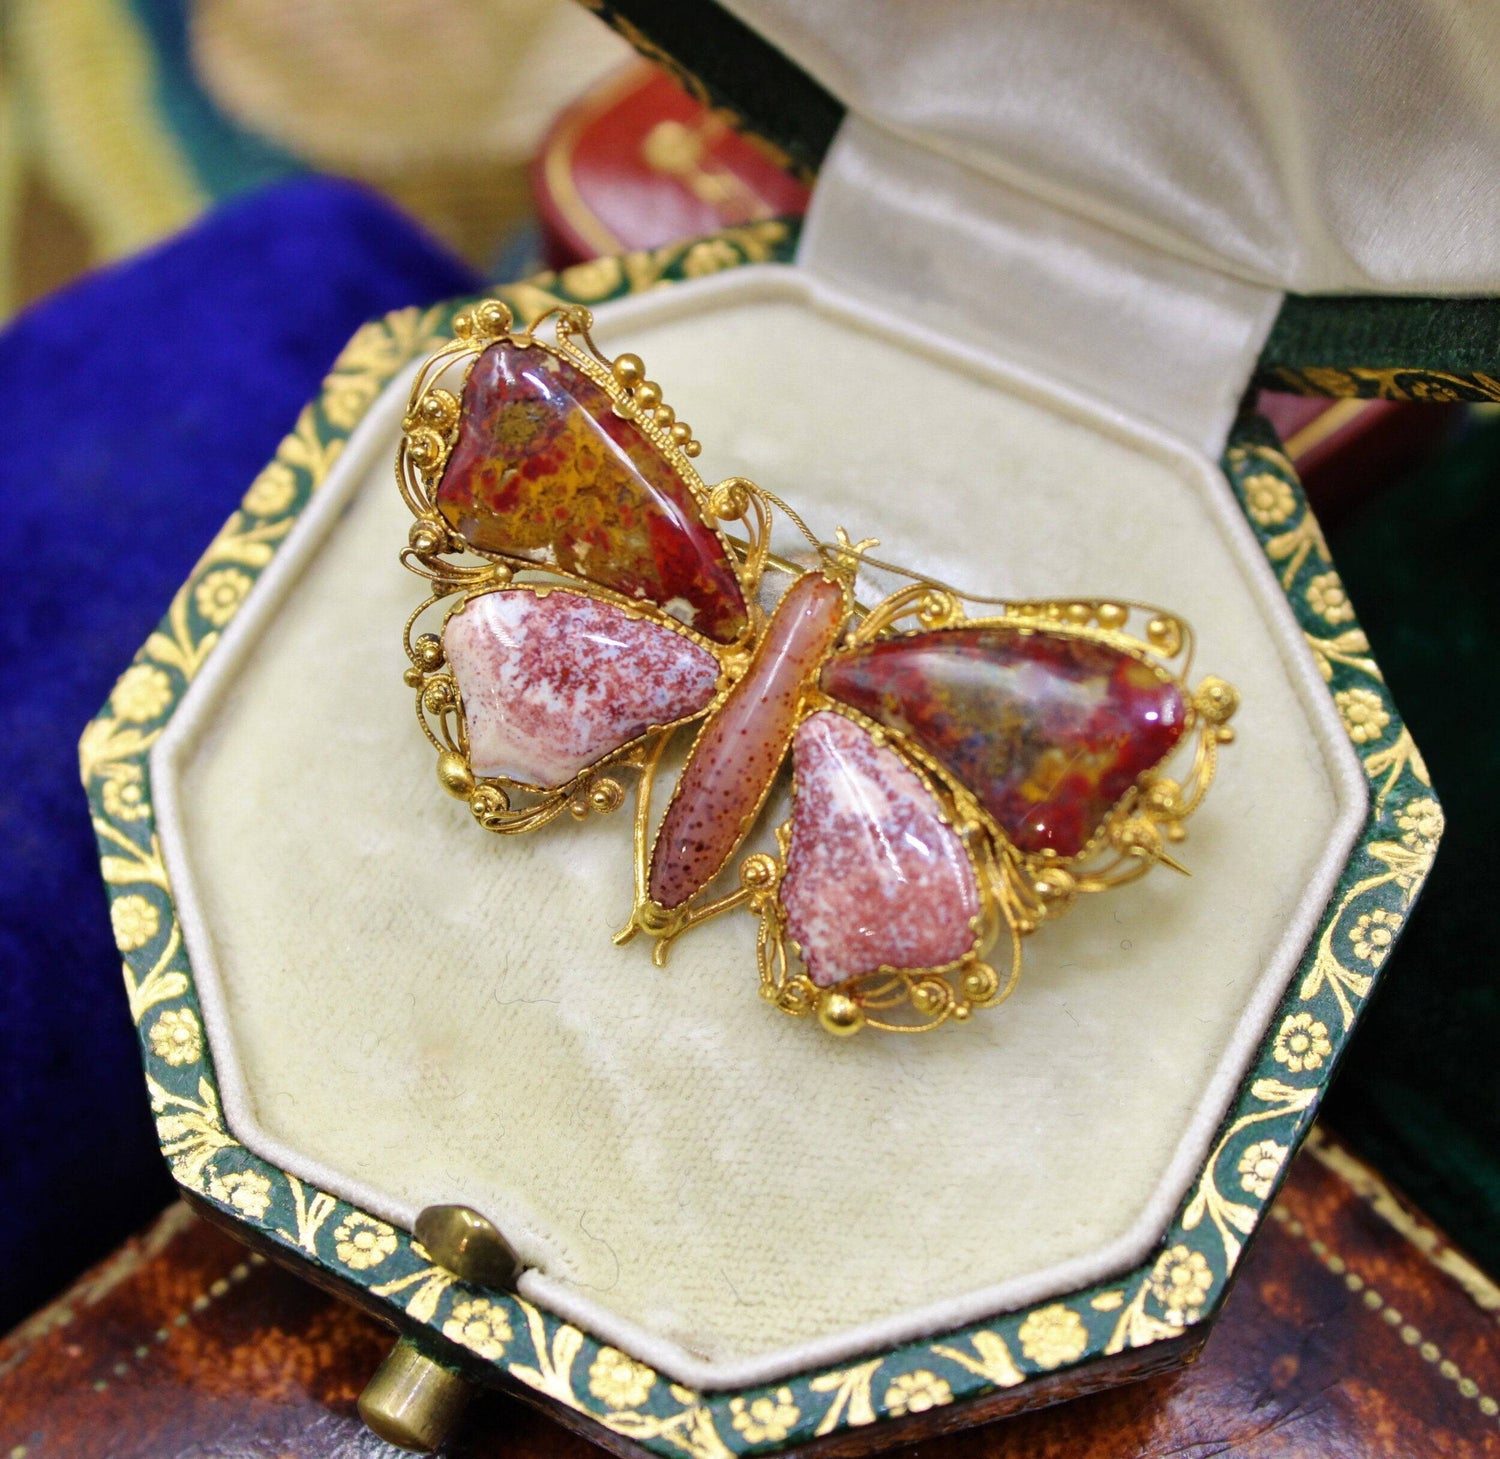 An extremely fine Georgian Agate Butterfly Brooch set in High Carat Yellow Gold, English, Circa 1780 - 1790 - Robin Haydock Antiques